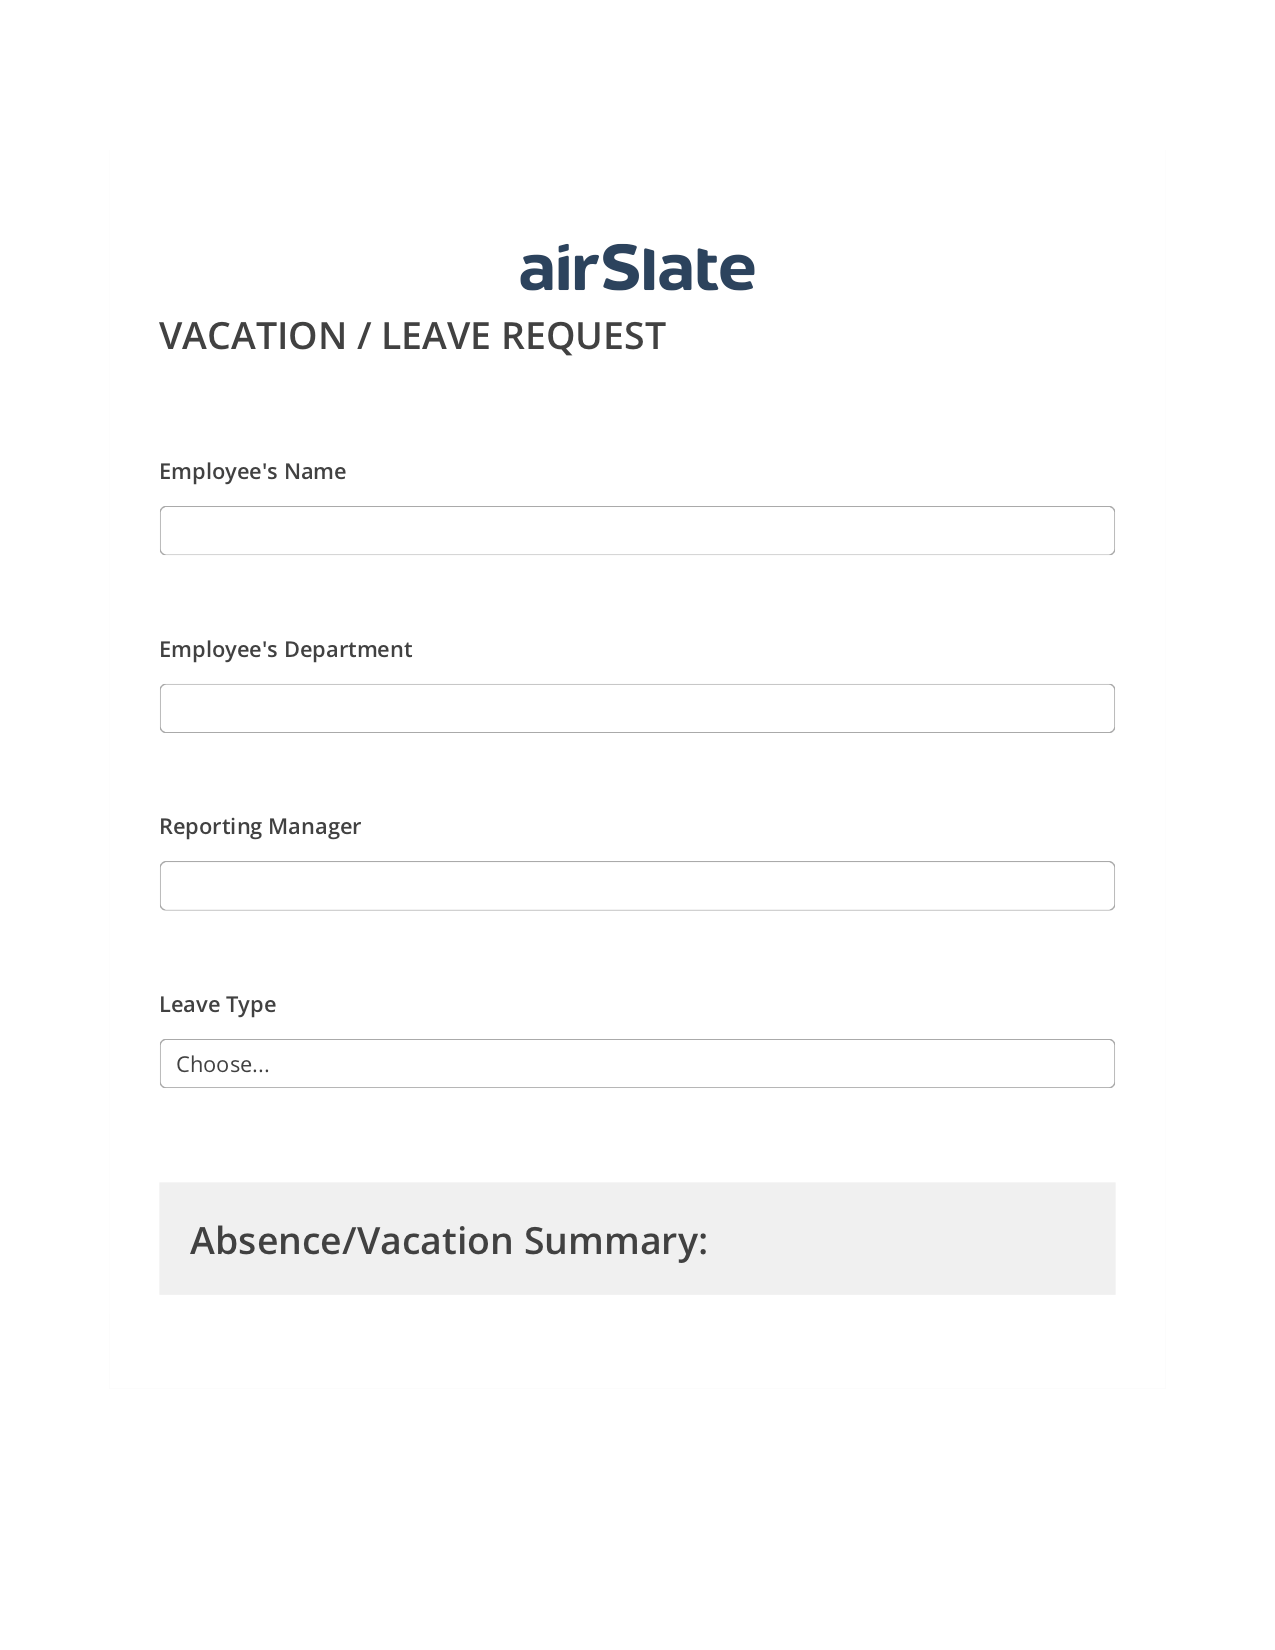 Vacation/Leave Request Workflow Pre-fill from CSV File Bot, Custom Field's Value Bot, Export to MySQL Bot